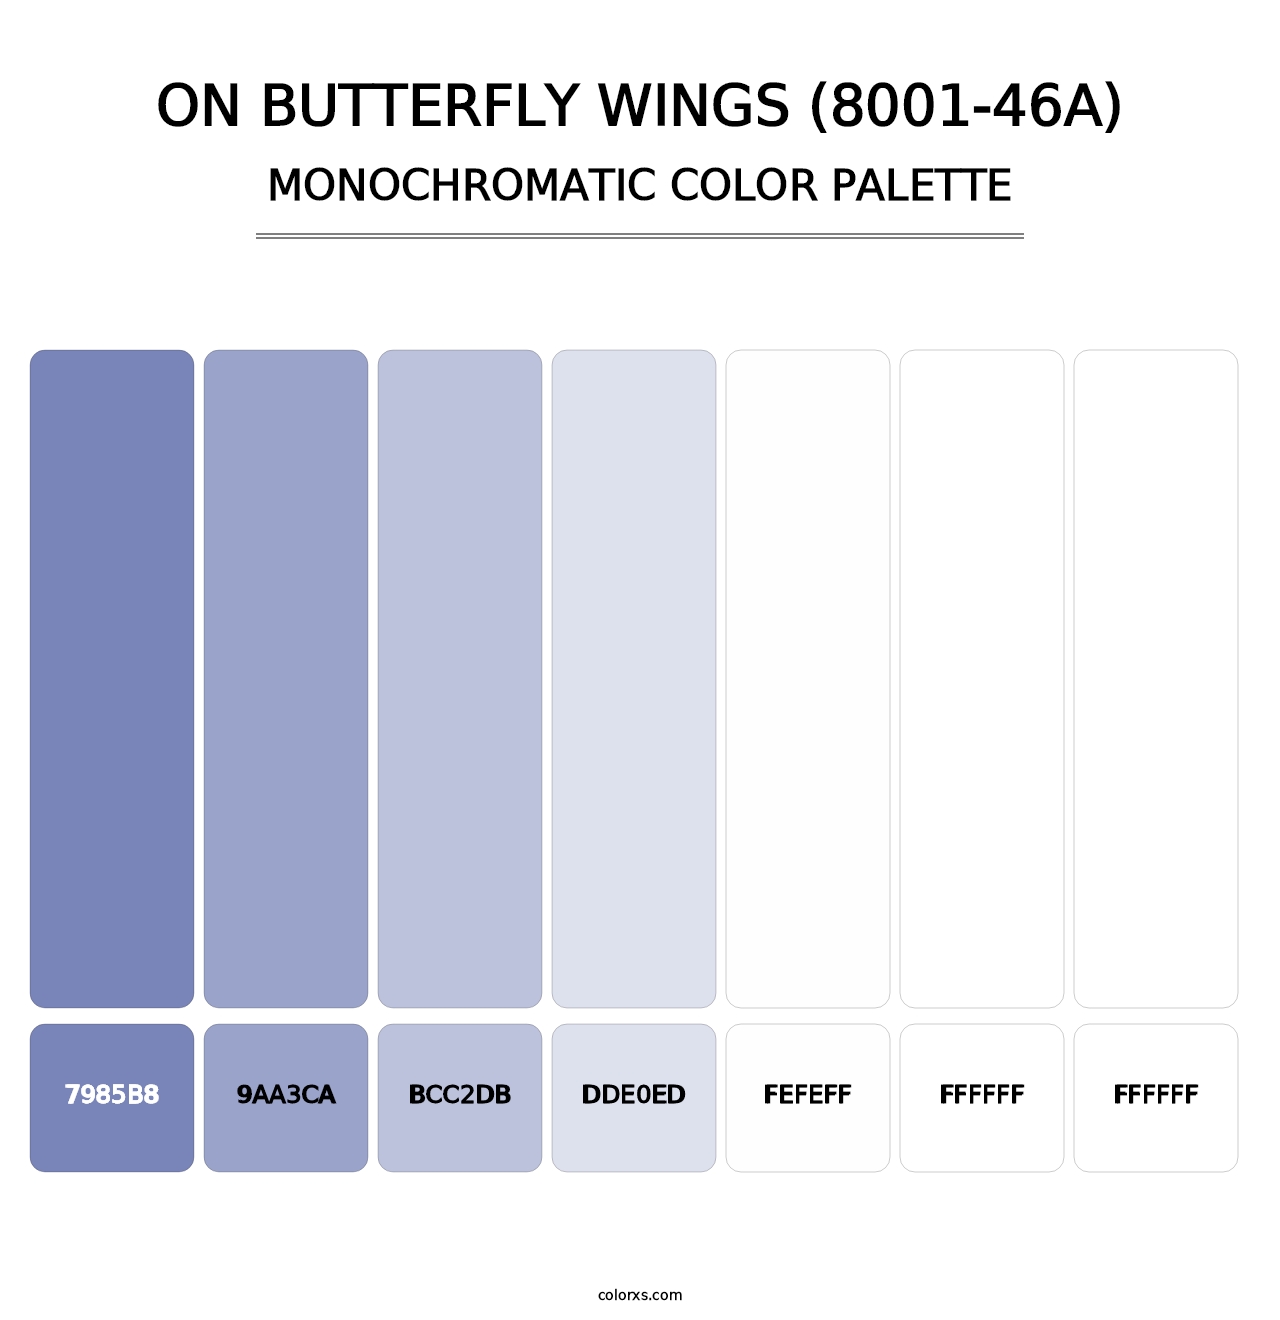 On Butterfly Wings (8001-46A) - Monochromatic Color Palette